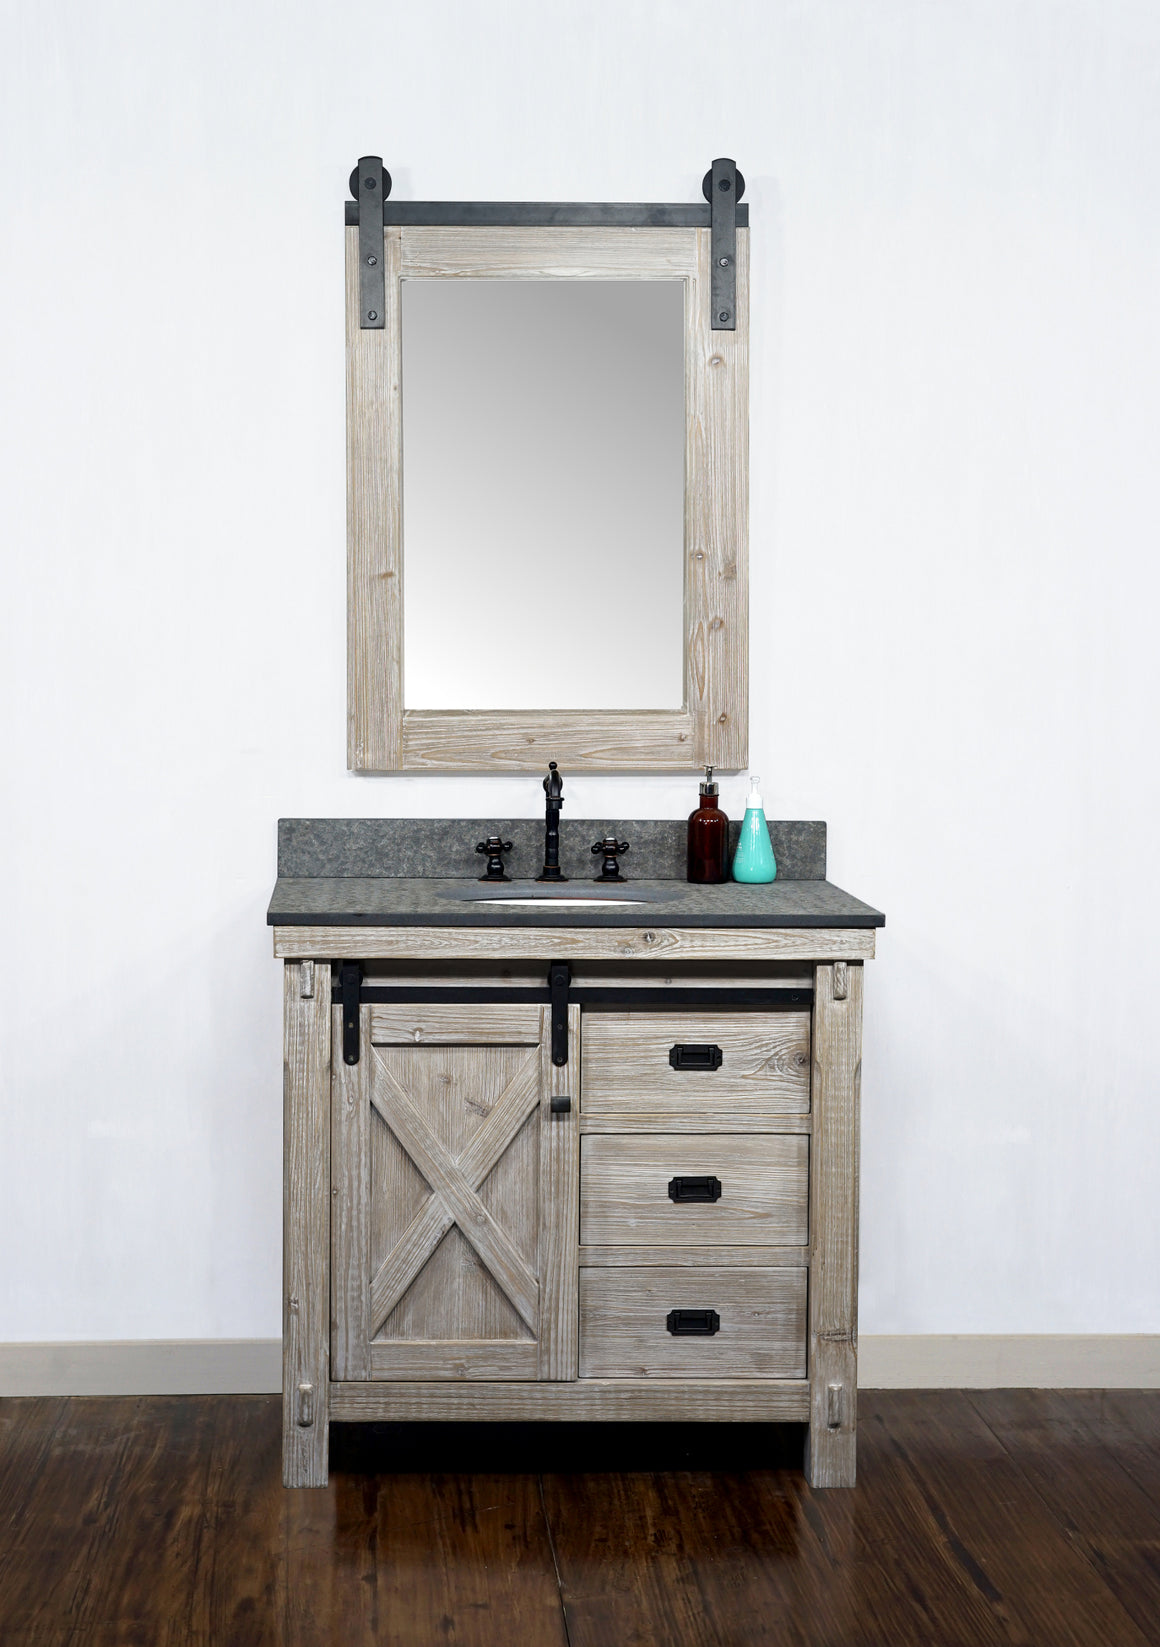 36"RUSTIC SOLID FIR BARN DOOR STYLE SINGLE SINK VANITY WITH RUSTIC STYLE POLISHED TEXTURED SURFACE GRANITE TOP IN MATTE GREY-NO FAUCET